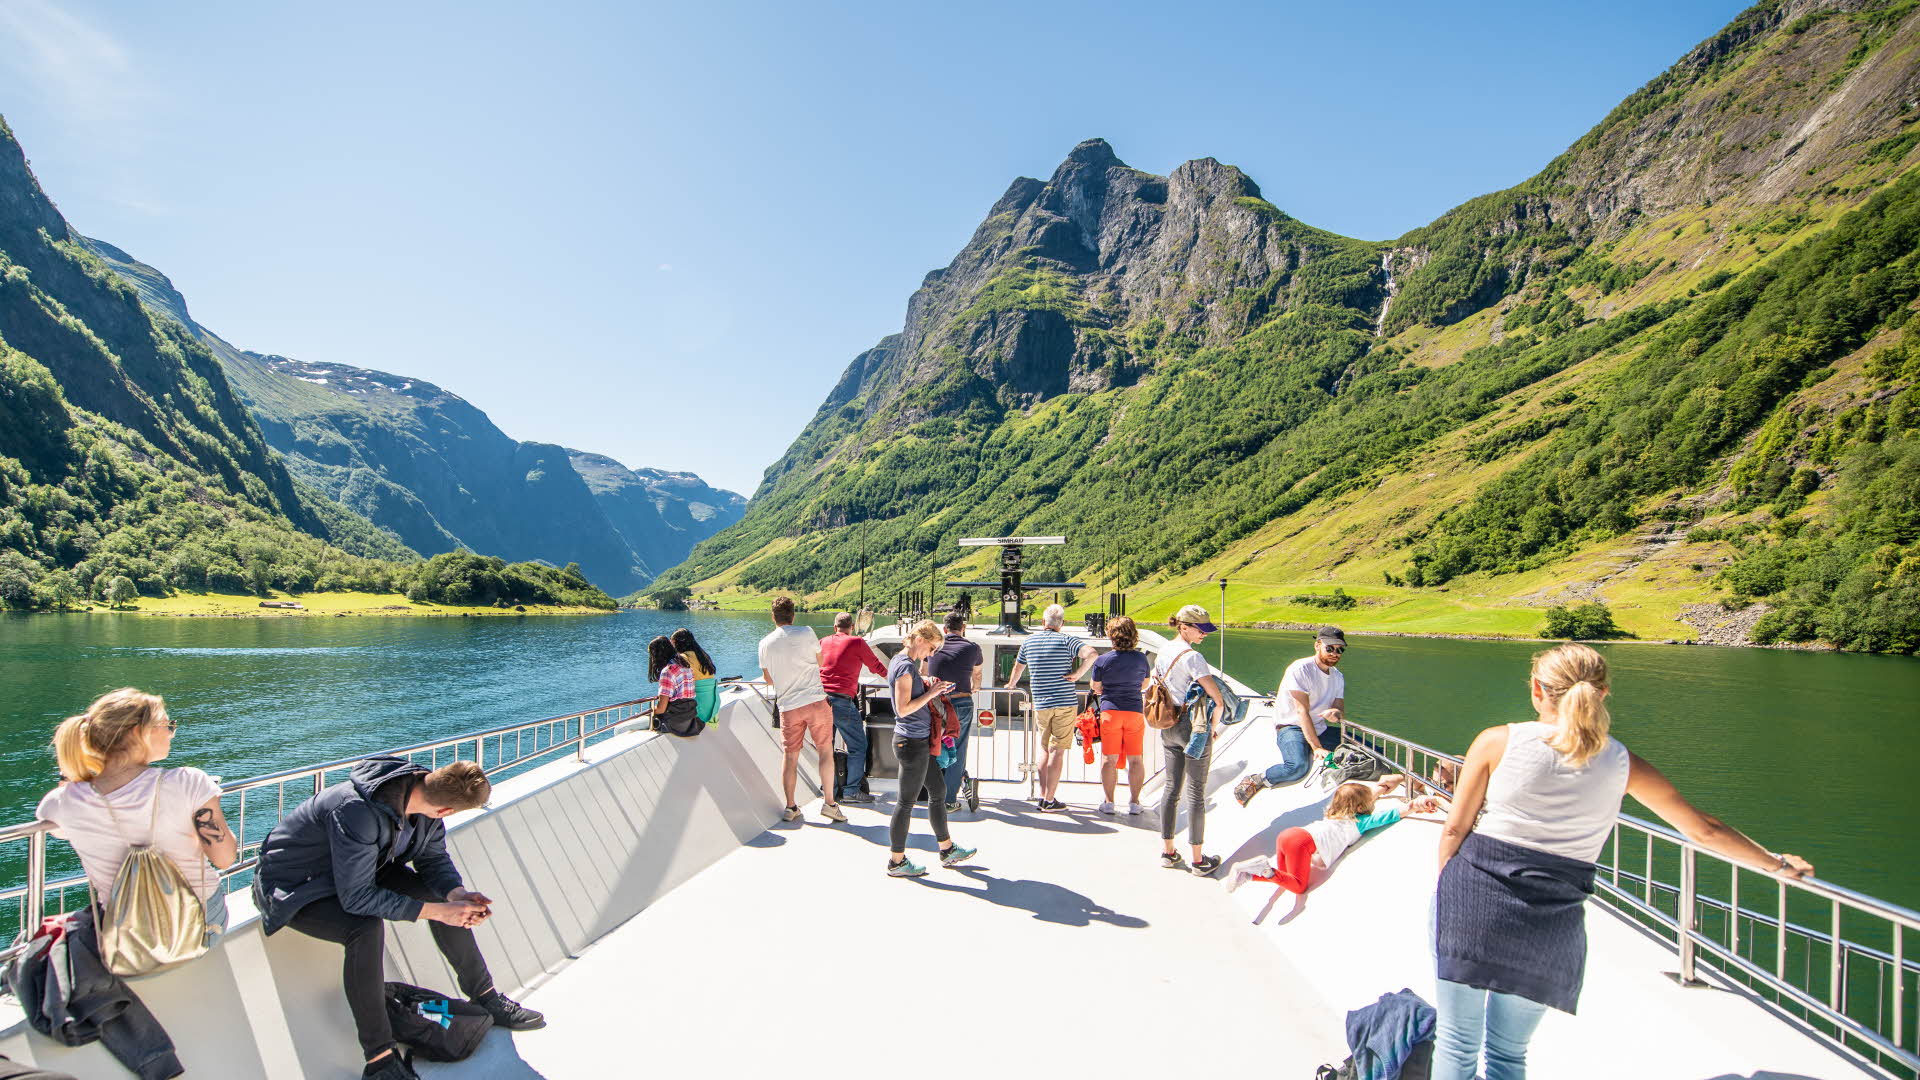 Tourists enjoying the view of Bakka from the roof of a boat on the Nærøyfjord